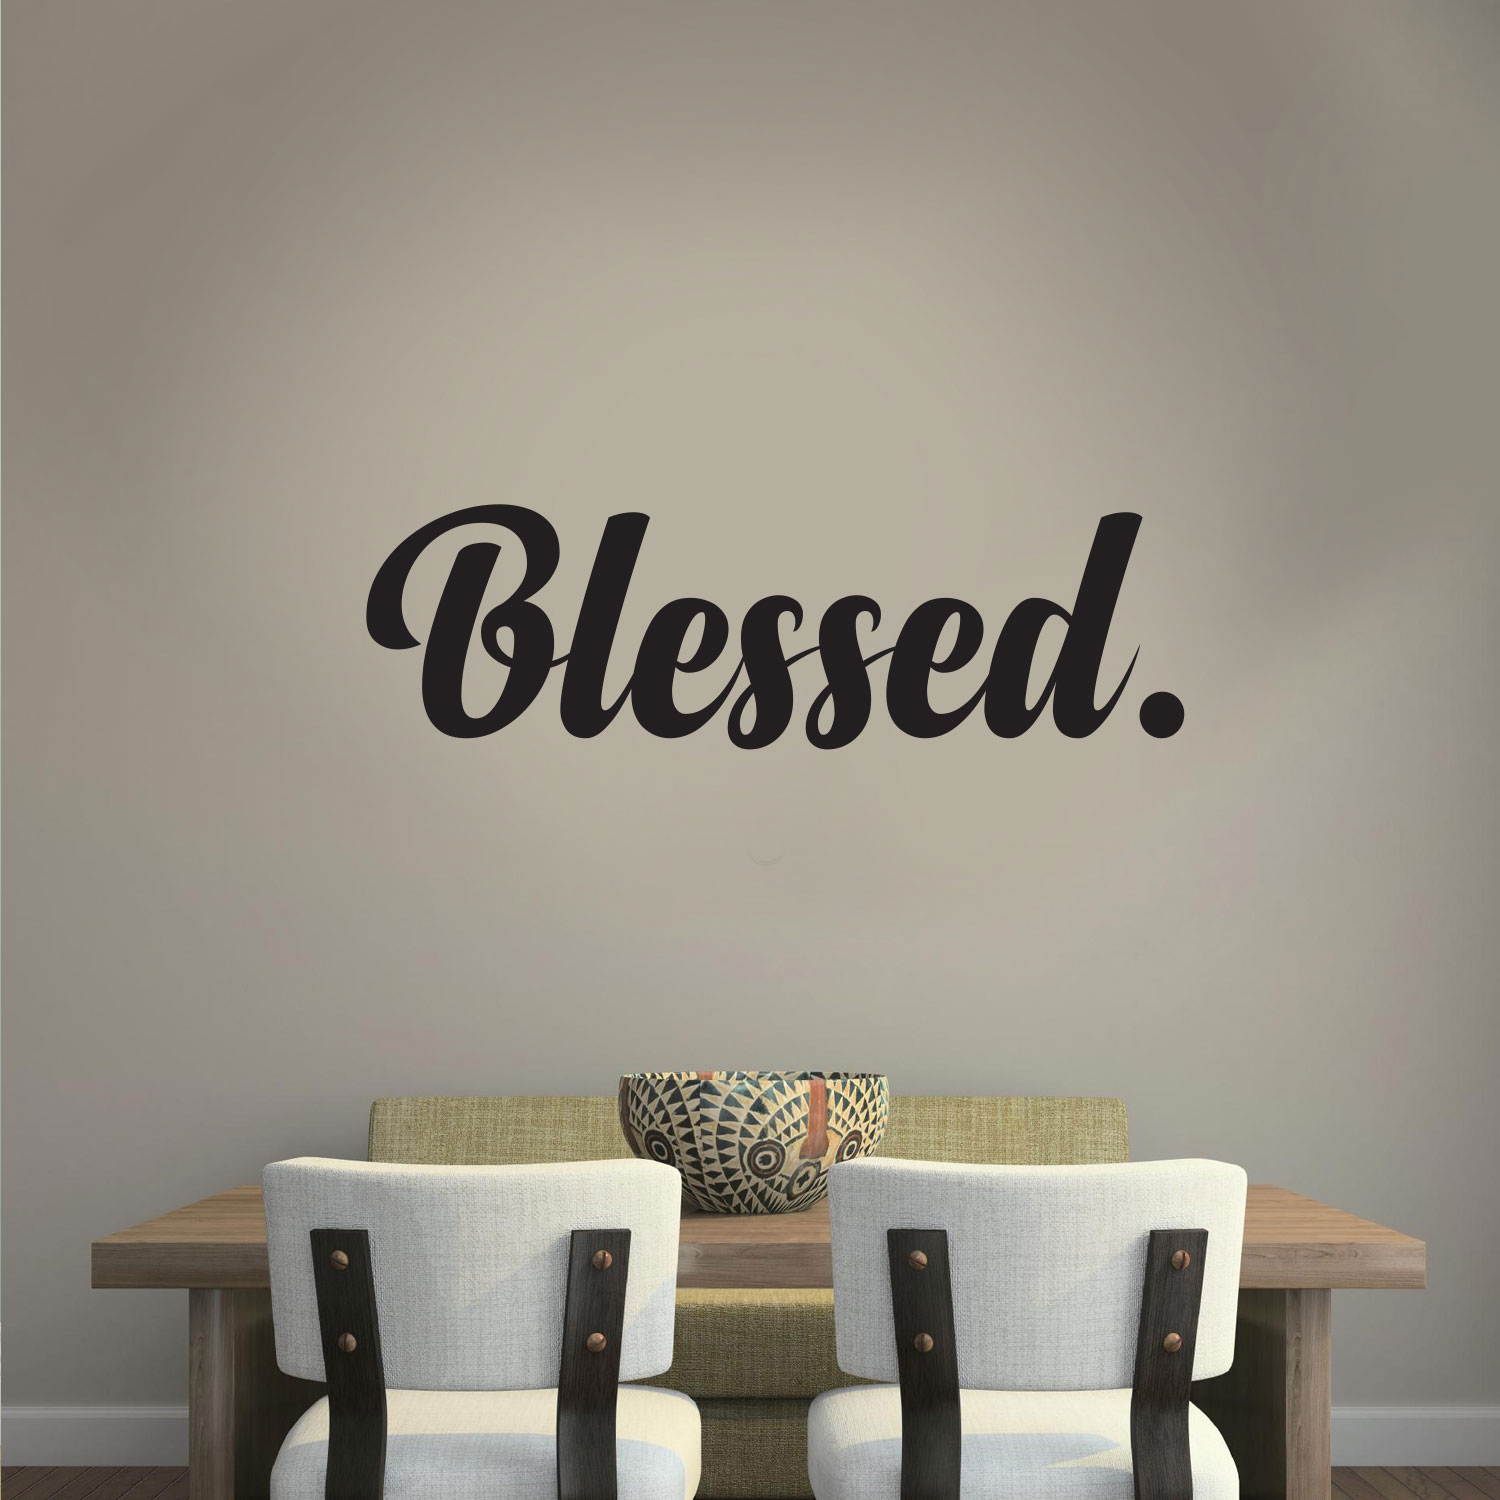  Inspirational  Religious  Quotes  Wall  Art  Vinyl Decal eBay